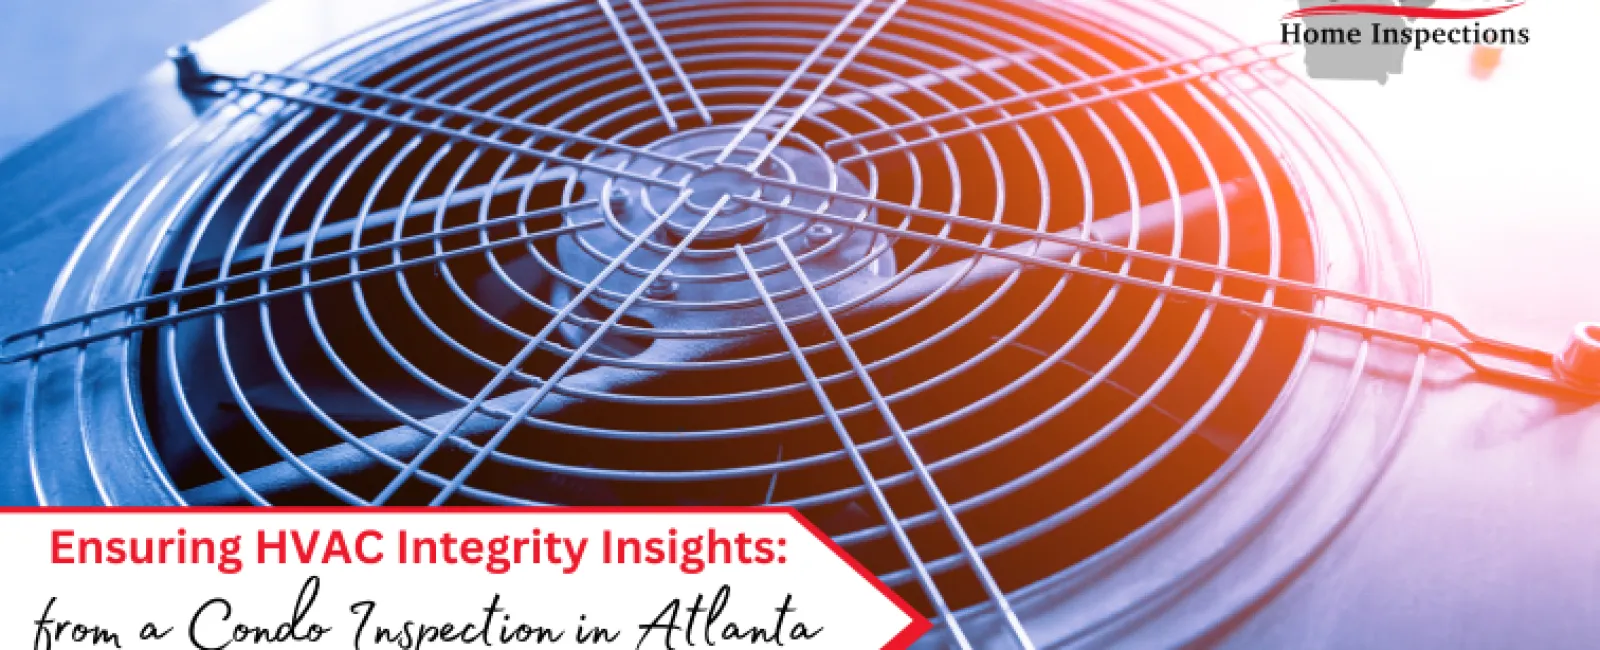 Ensuring HVAC Integrity: Insights from a Condo Inspection in Atlanta